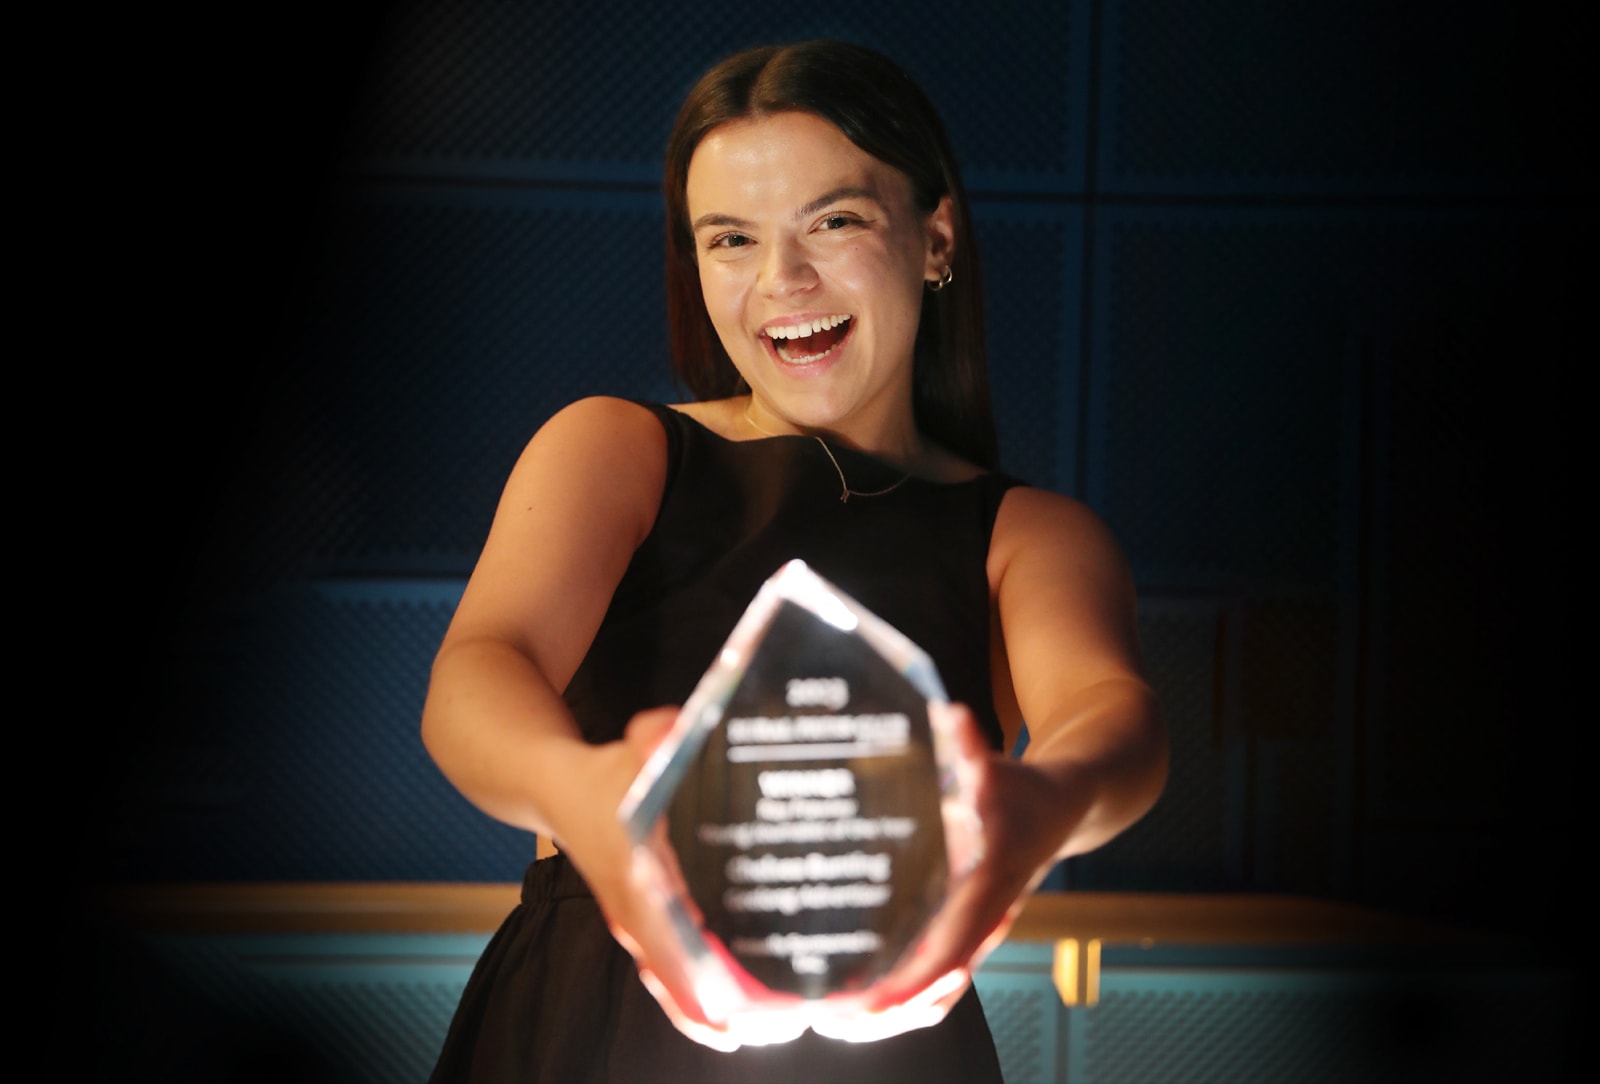 Chelsea Bunting, Geelong Advertiser, won Young Journalist of the Year.